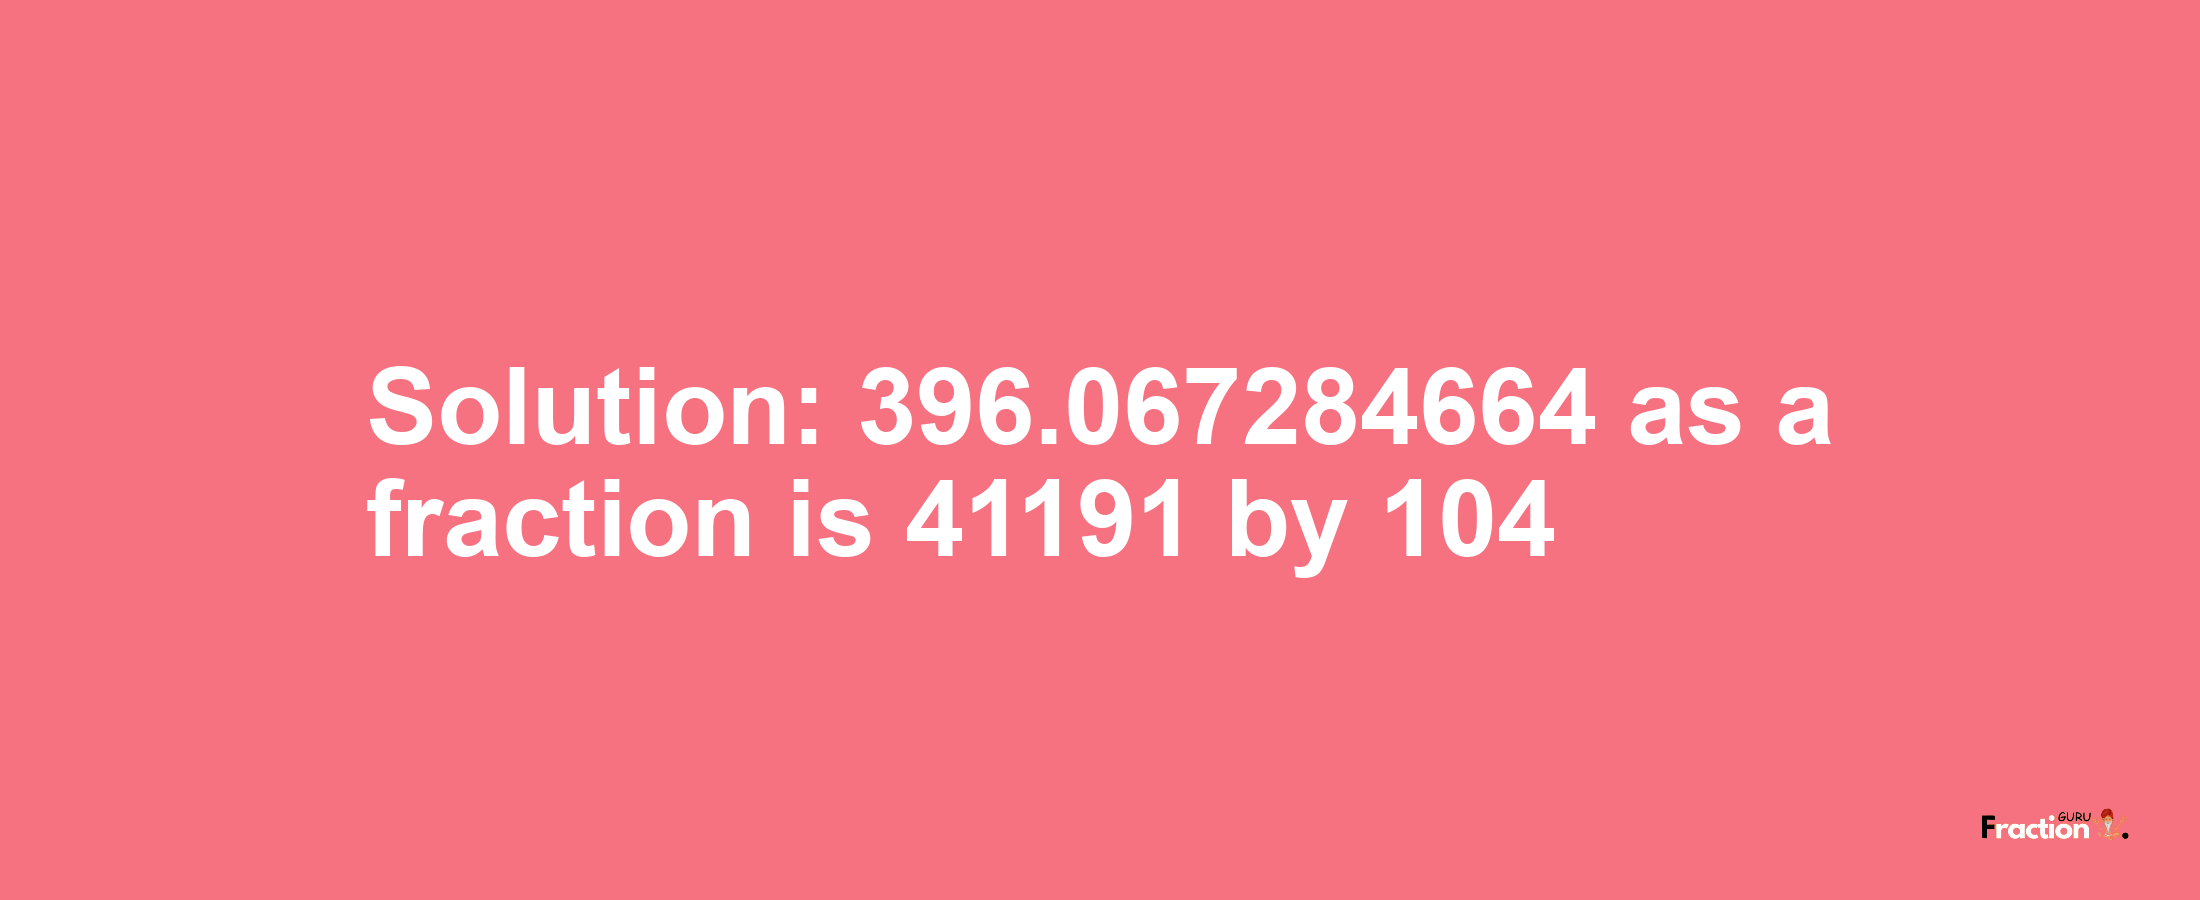 Solution:396.067284664 as a fraction is 41191/104